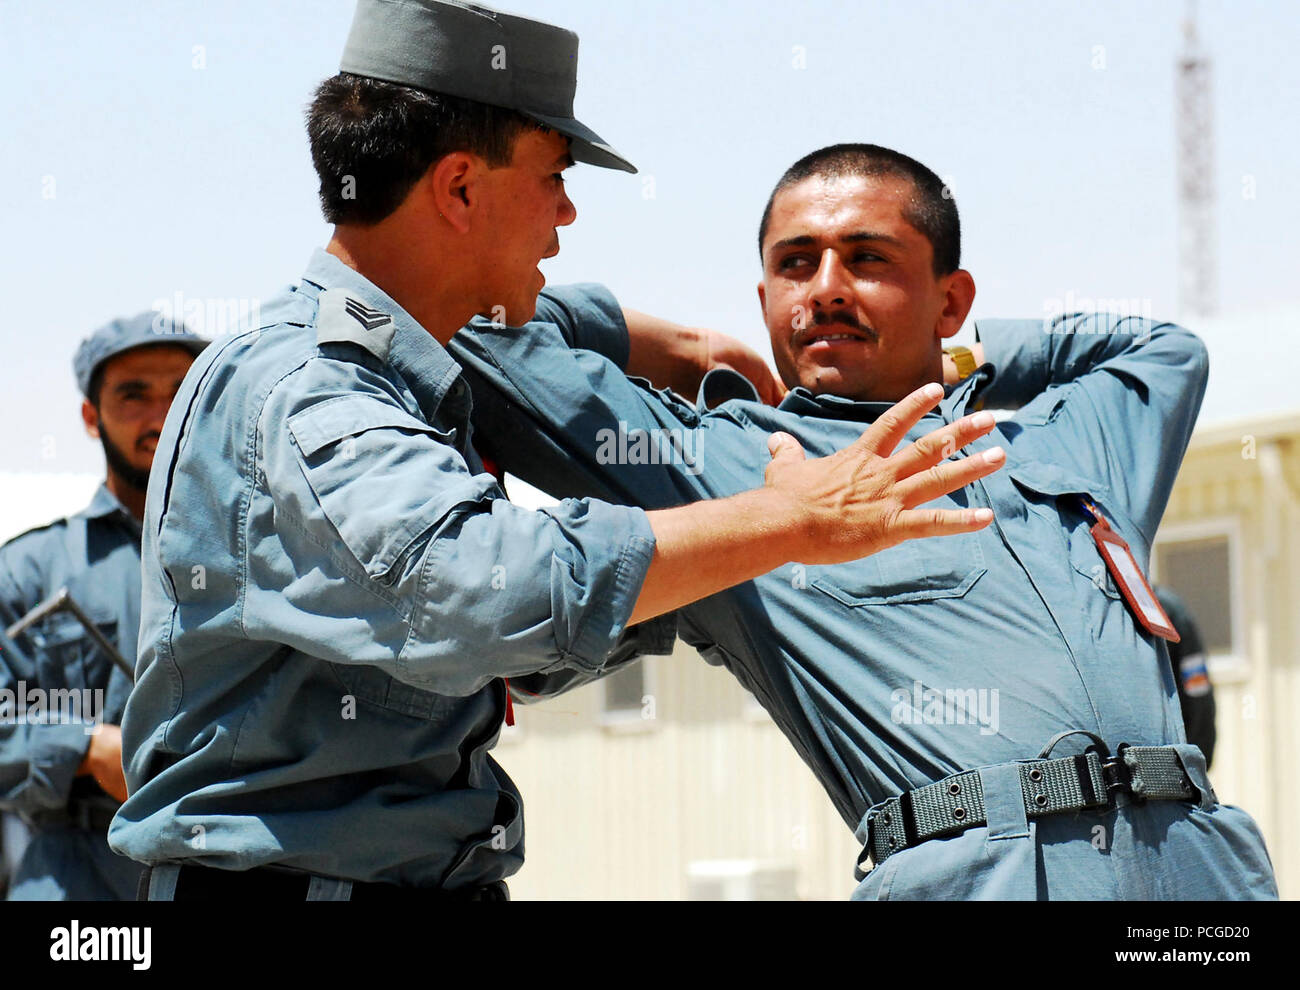 Afghanistan (July 19, 2010) – An Afghan National Police (ANP) instructor at Recruit Training Center-Kandahar (RTC-K) demonstrates a suspect apprehension and restraint technique. RTC-K has trained more than 17,747 Afghan volunteers to join the ranks of the ANP since its inception in 2004. U.S. Navy Stock Photo